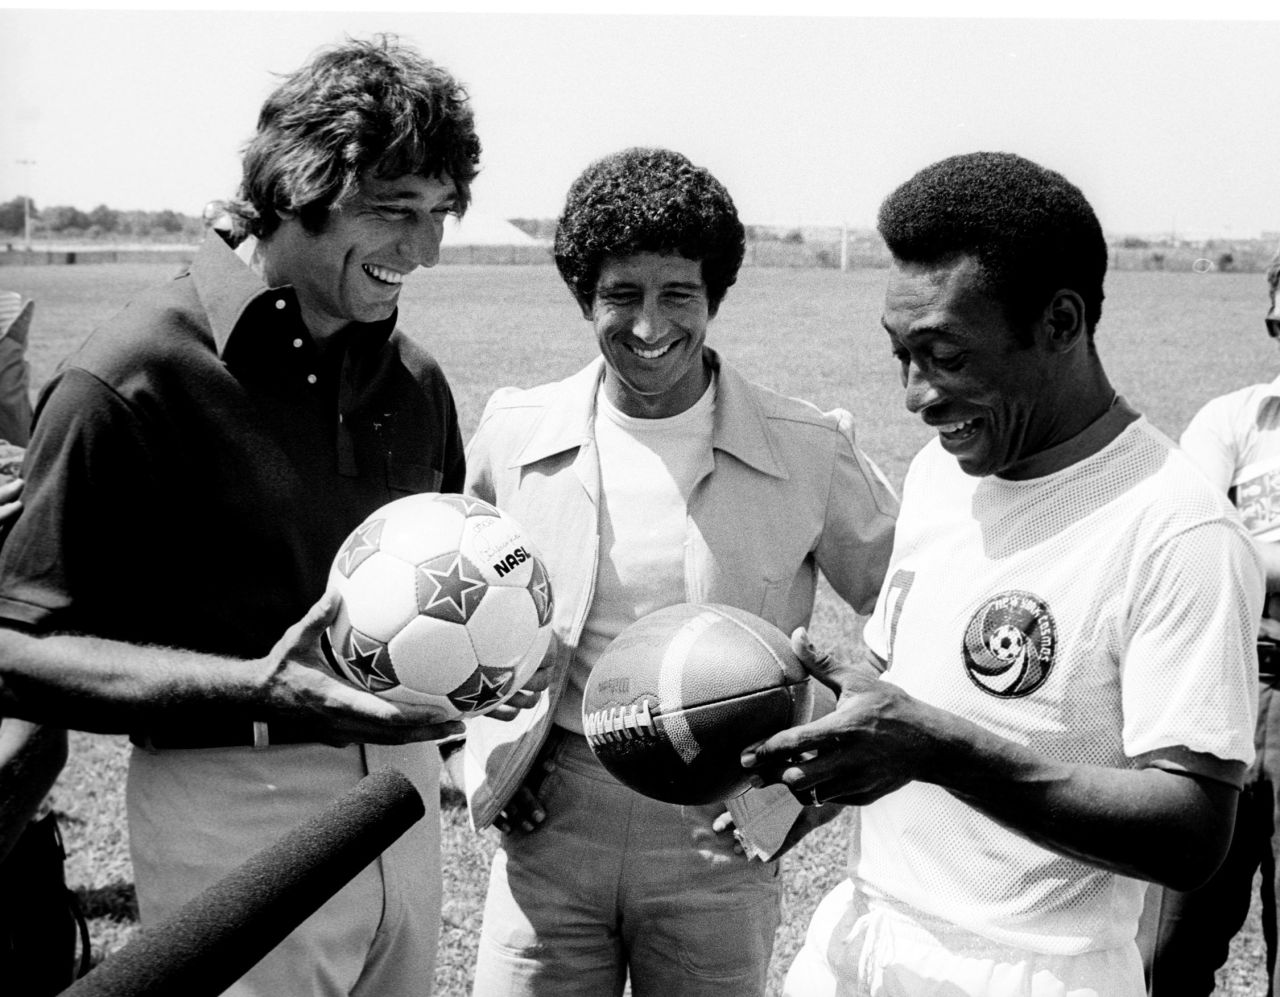 American football star Joe Namath, left, exchanges balls with Pelé during a promotional event in New York in 1975.